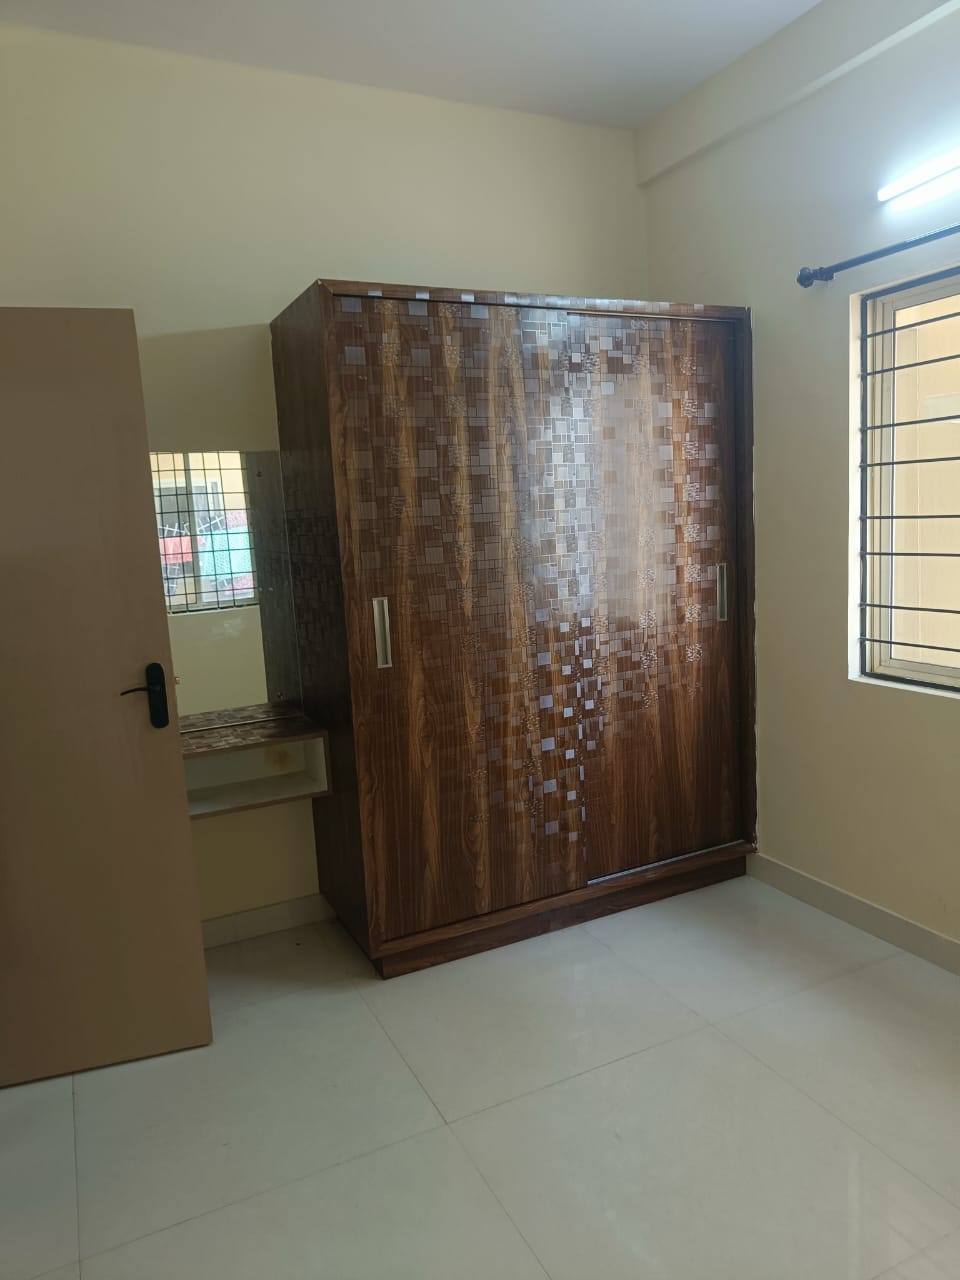 1 BHK Residential Apartment for Lease Only at JAML2 - 4042 in Choodasandra